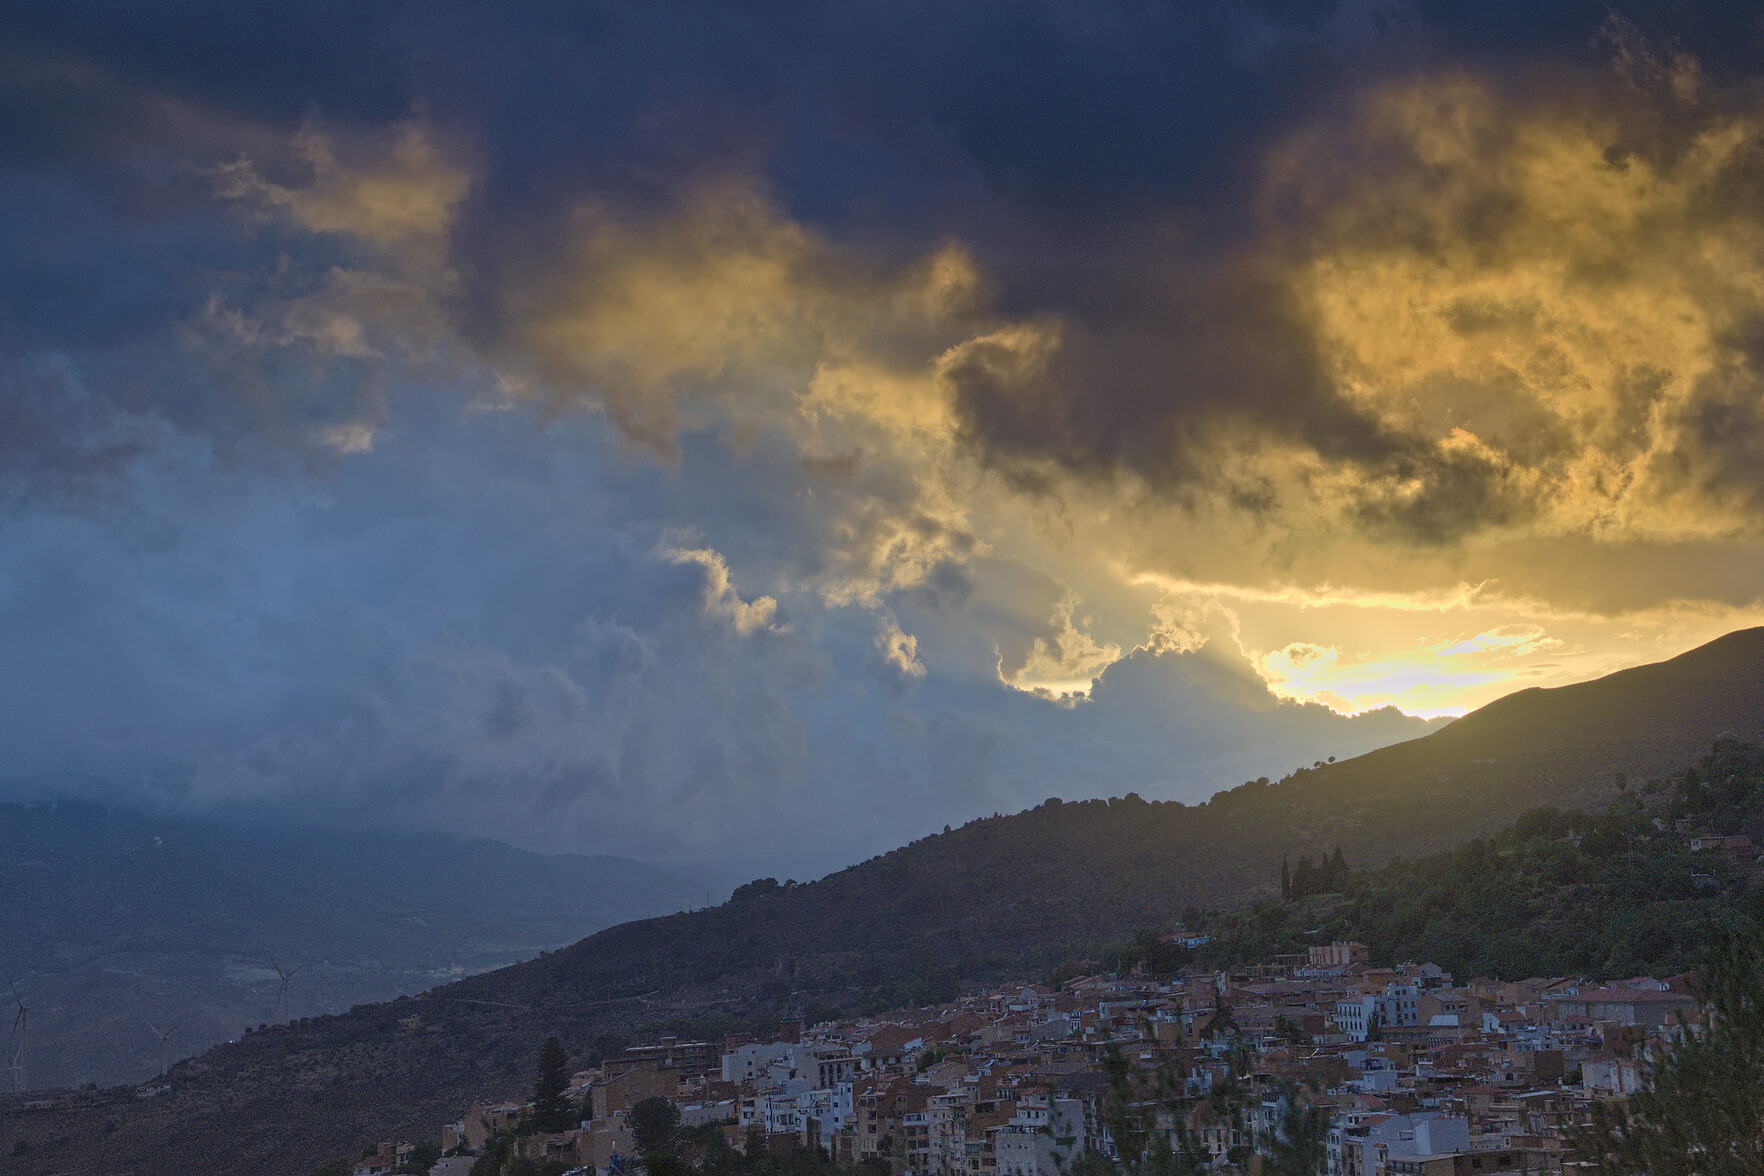 Dark storm clouds gather as the sun begins to set. Lower half of the image contains a spanish town at twilight